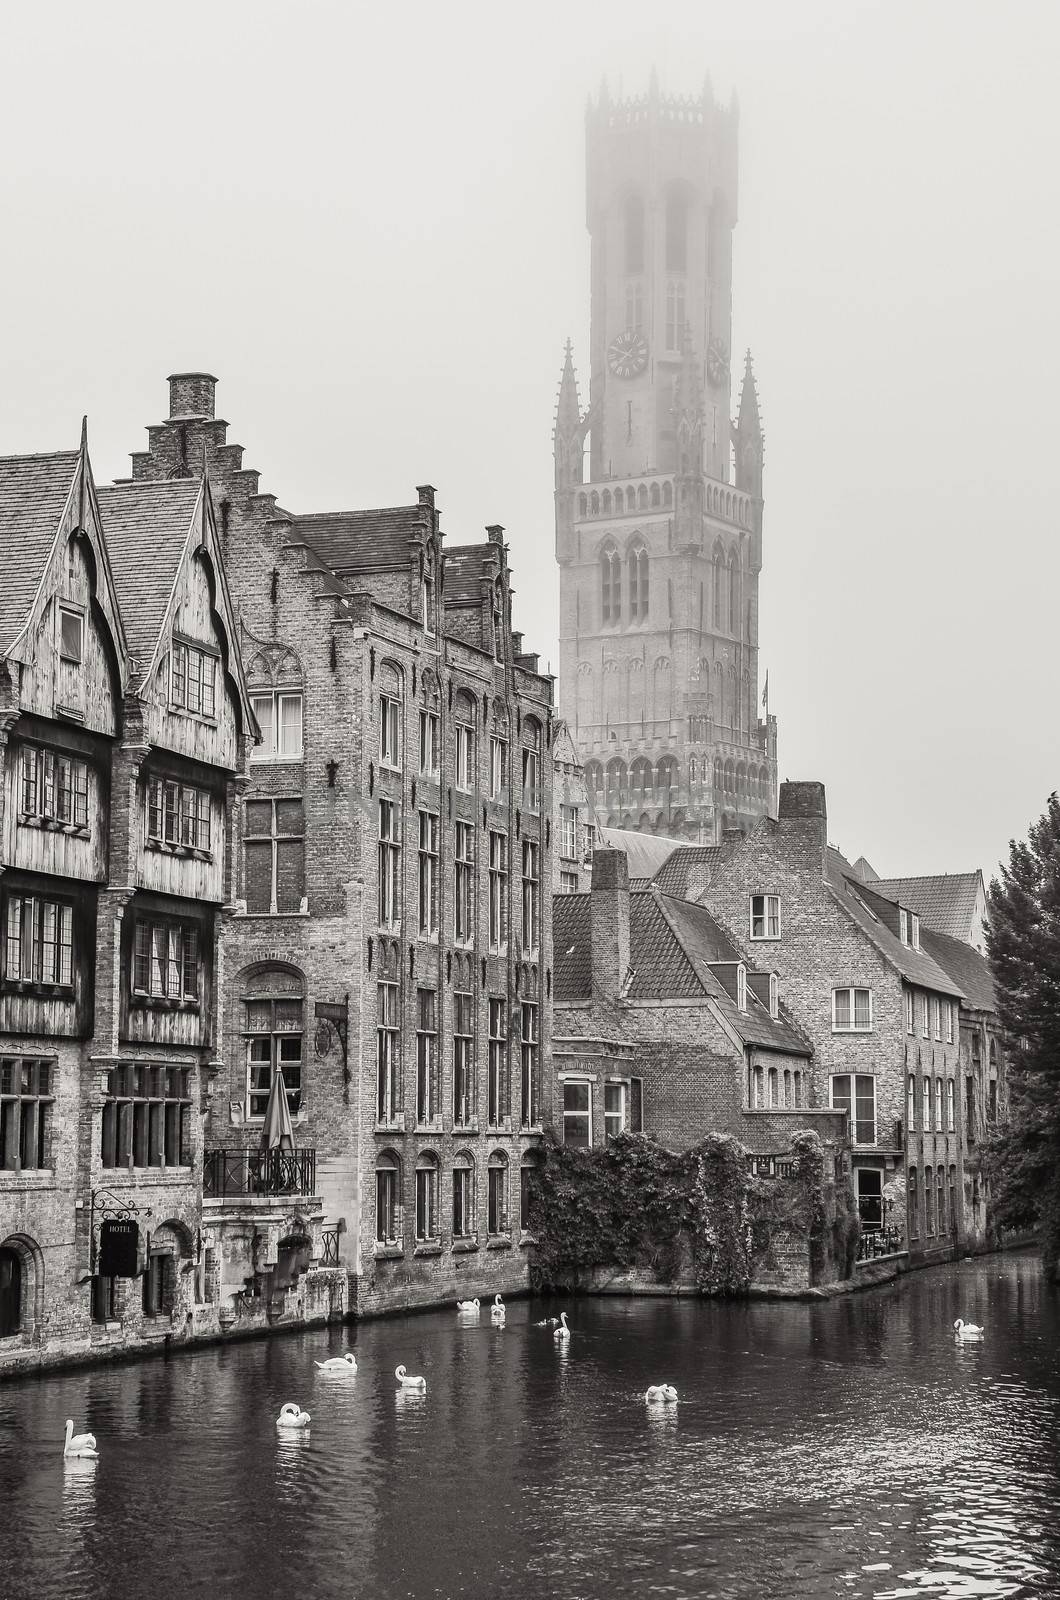 Bruges water canal and Belfry tower in monochrome by martinm303